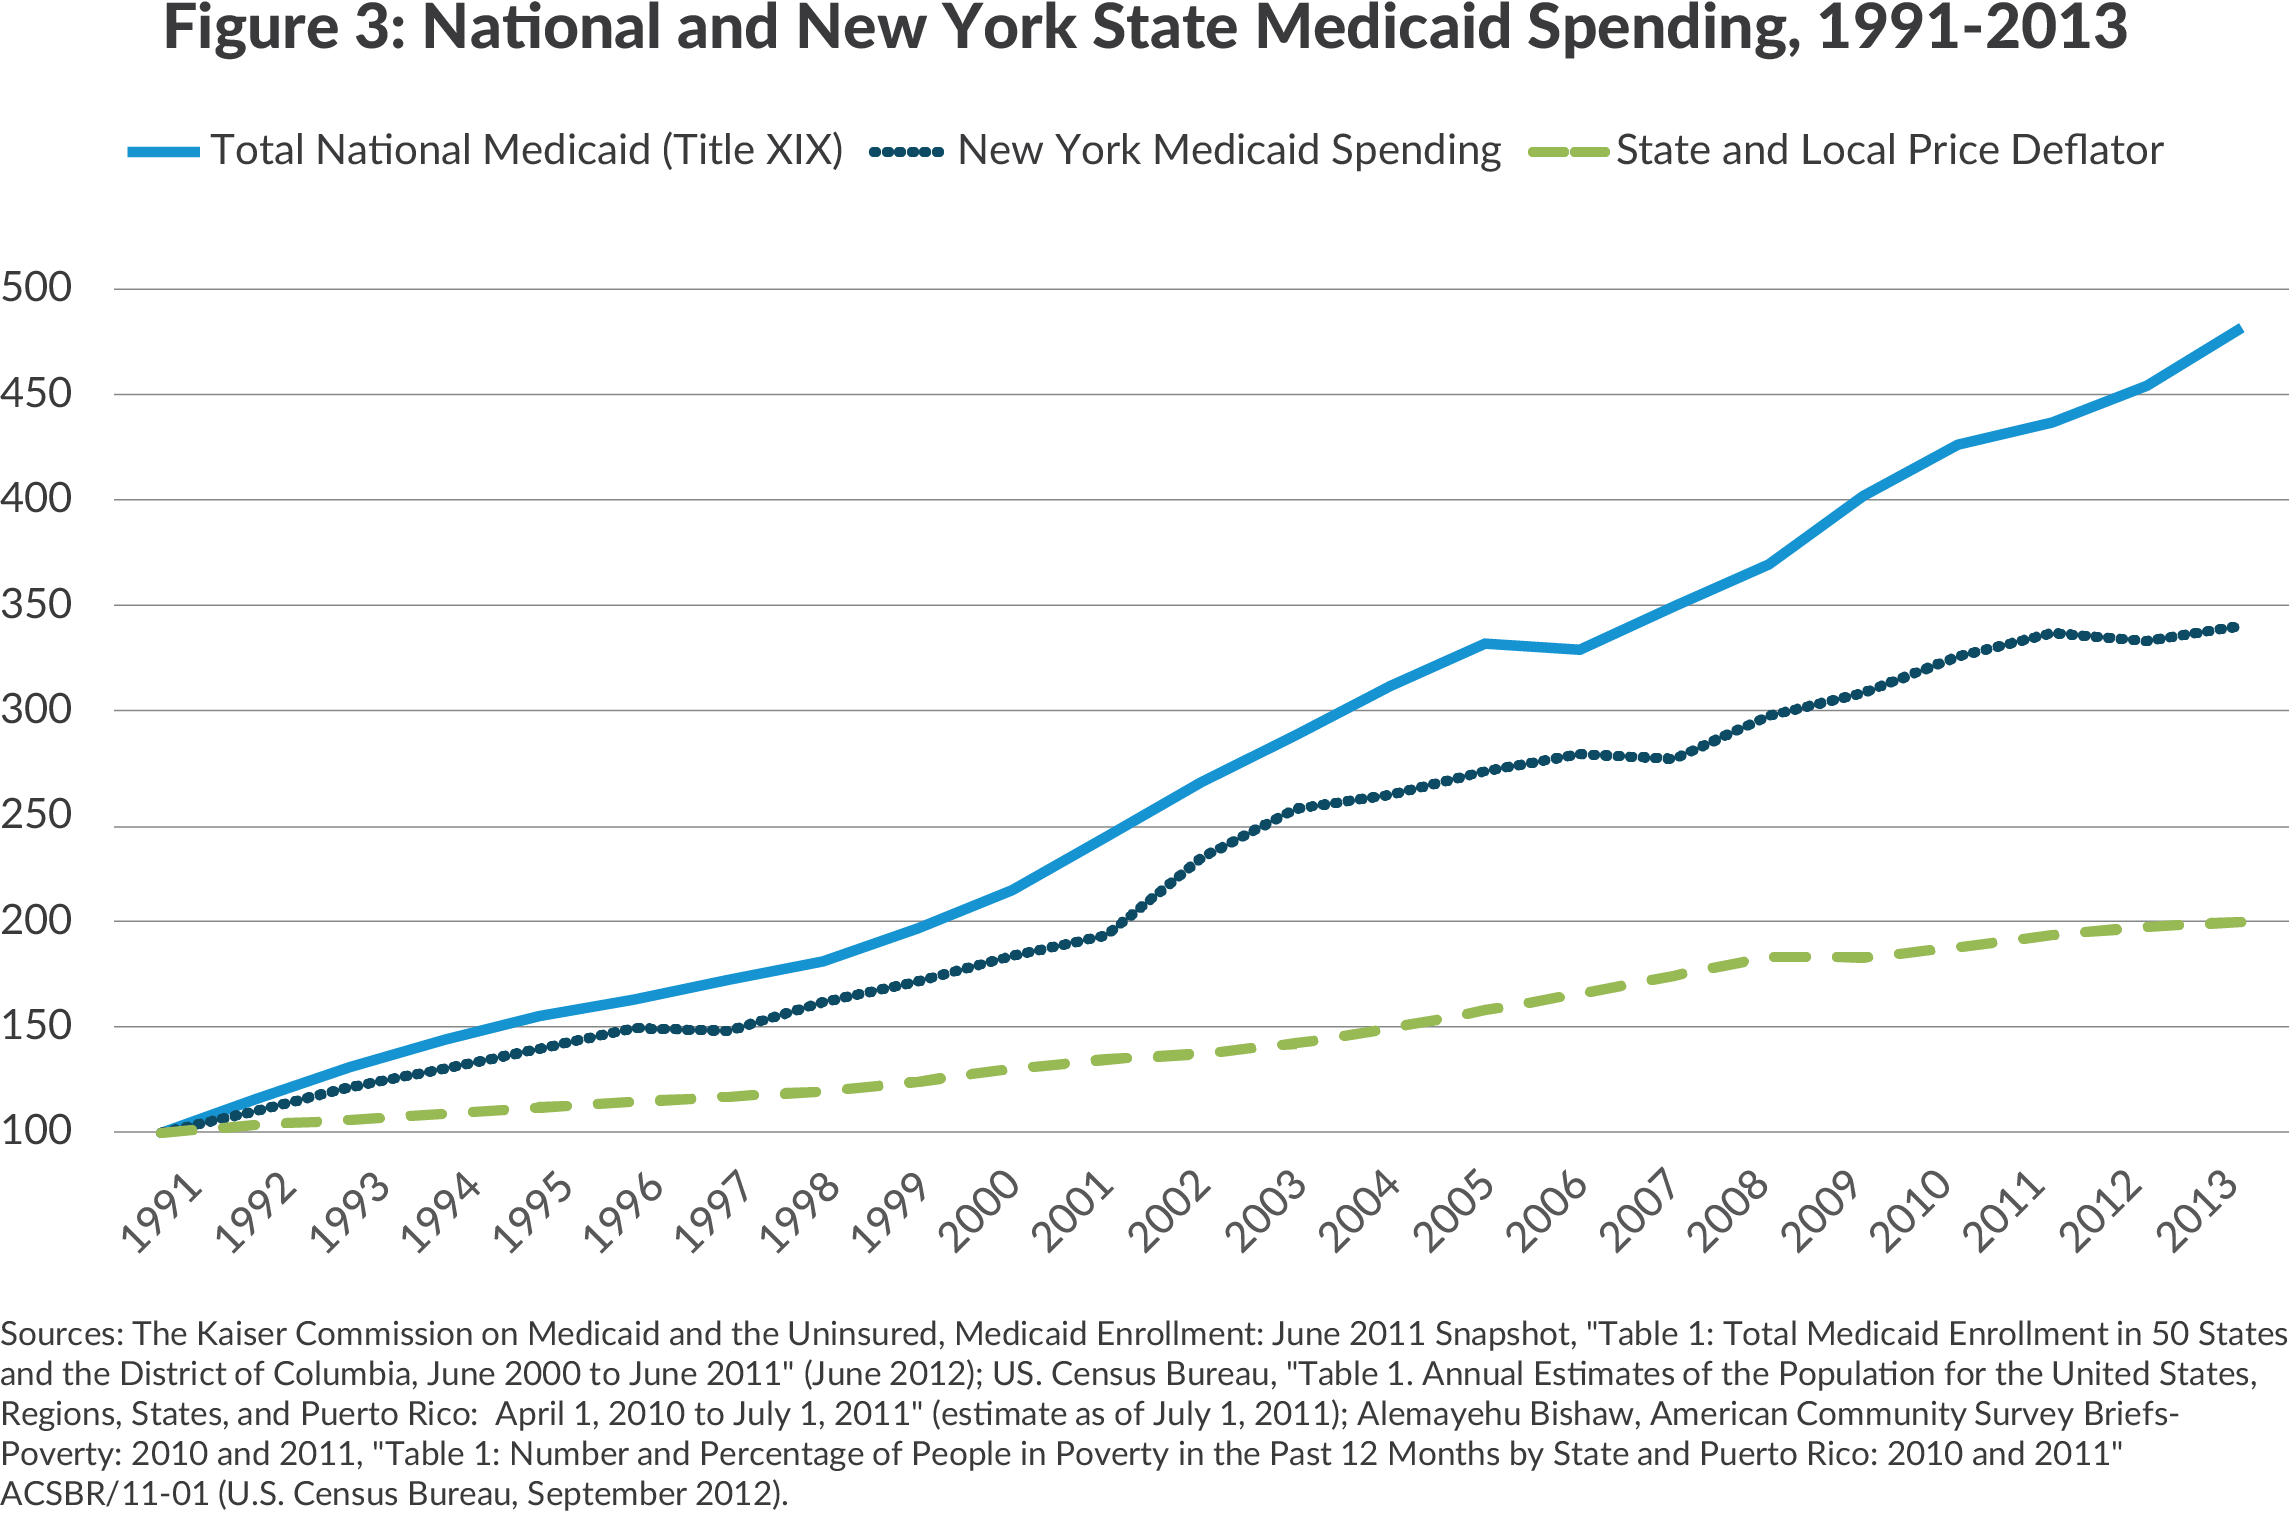 National and Ny medicaid spending, 1991-2013